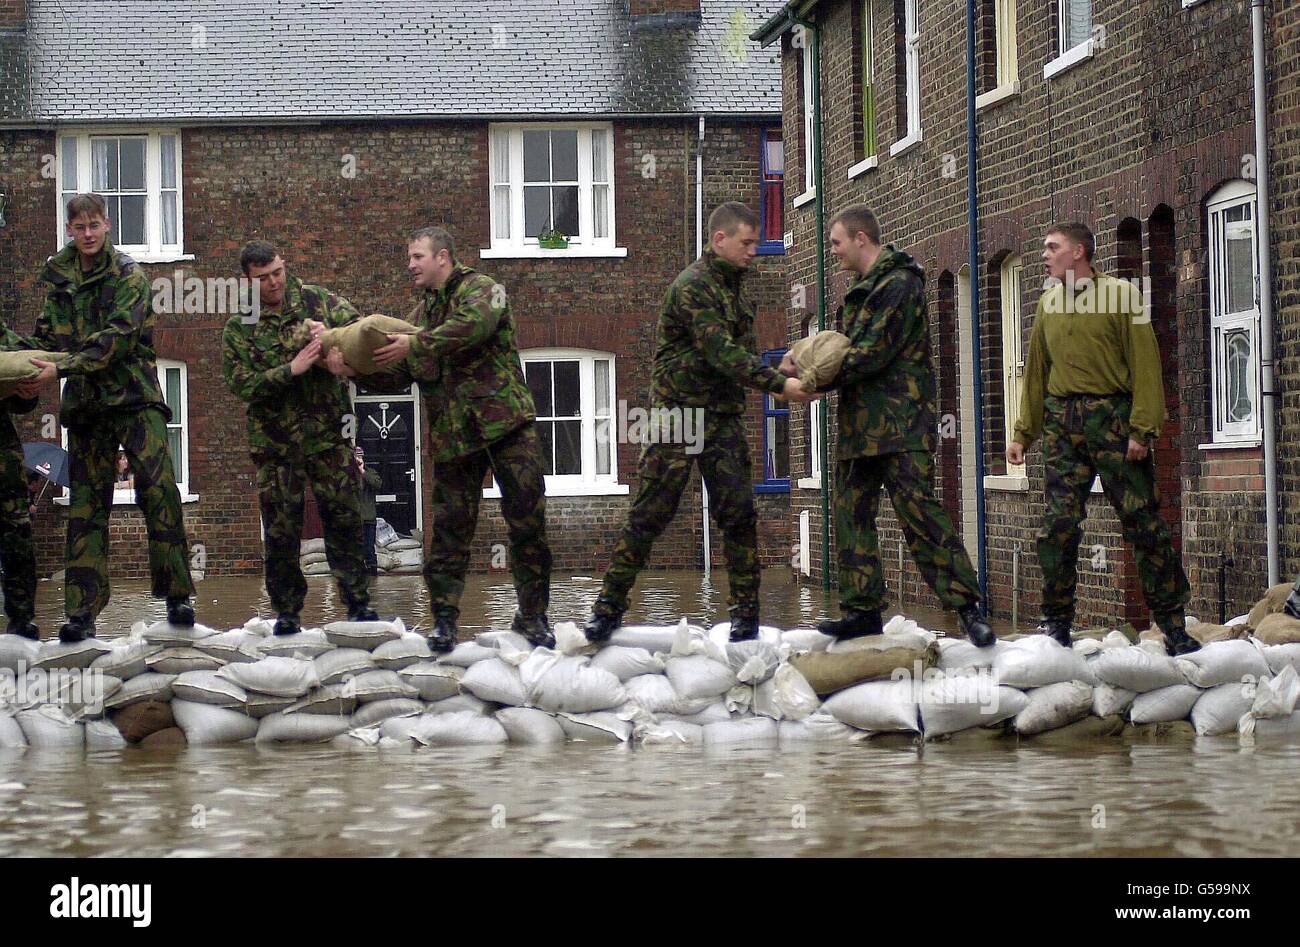 Library file dated 07/11/2000 of the army bolstering defences in York. Almost 200 soldiers who worked to helped the flood relief efforts last year in York were Saturday 27 January 2001 awarded the Freedom of the City. The soldiers from 2 Signal Regiment, based at Imphal Barracks, York, were involved in the vital sandbagging operation to stop flood waters spreading. The city's Lord Mayor, Shan Braund, presented the Freedom scroll to Lieutenant Colonel Ian Cameron-Mowat. See PA story WEATHER Floods. PA photo: Toby Melville. Stock Photo